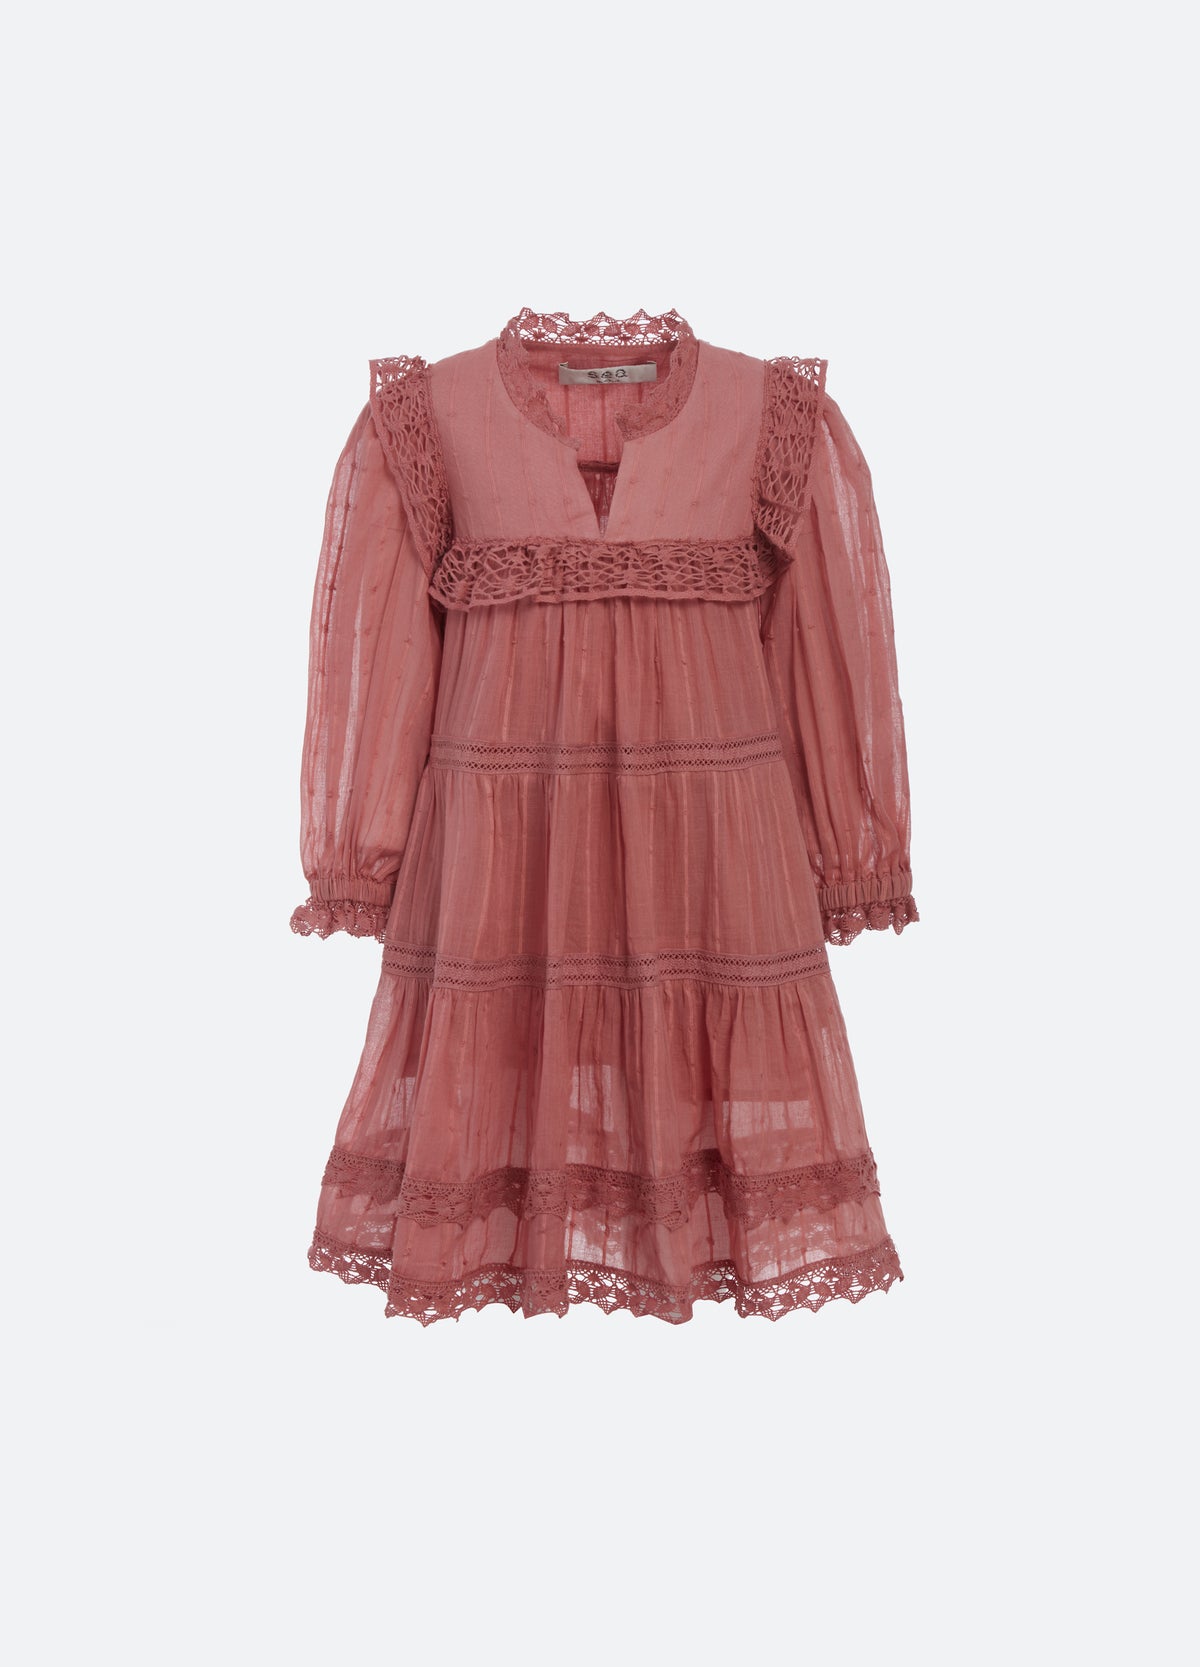 pink-haven kids dress-front view